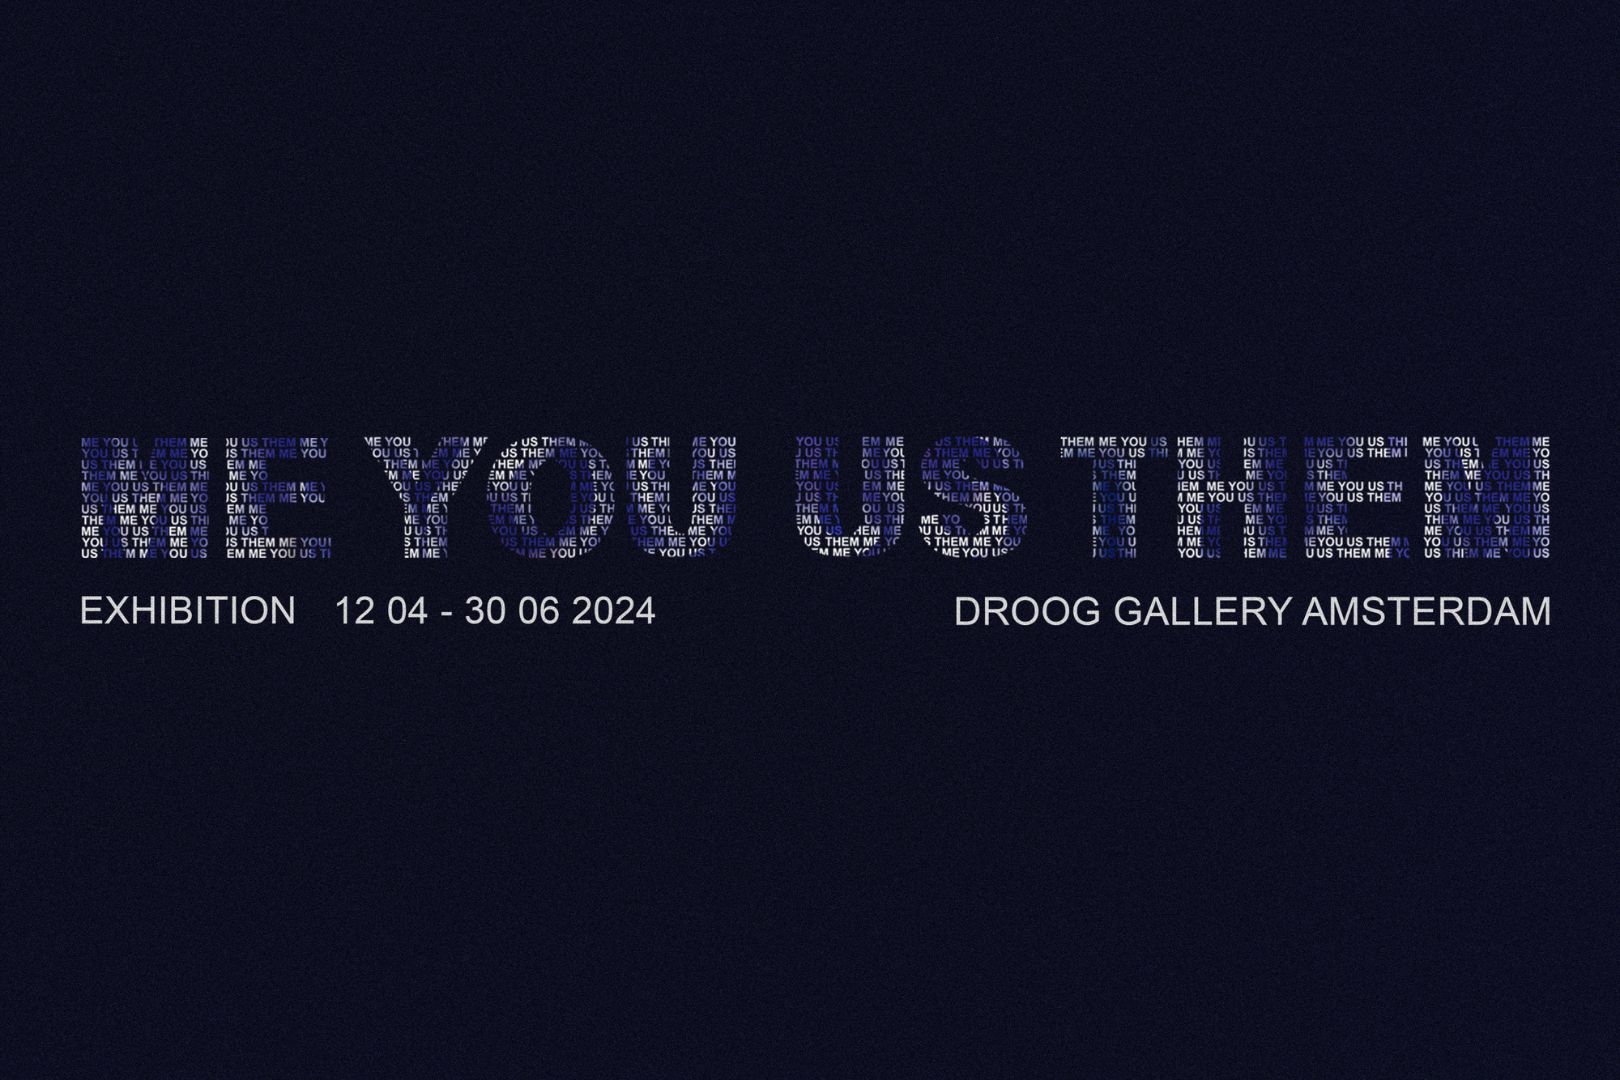 On show: ME/YOU, US/THEM